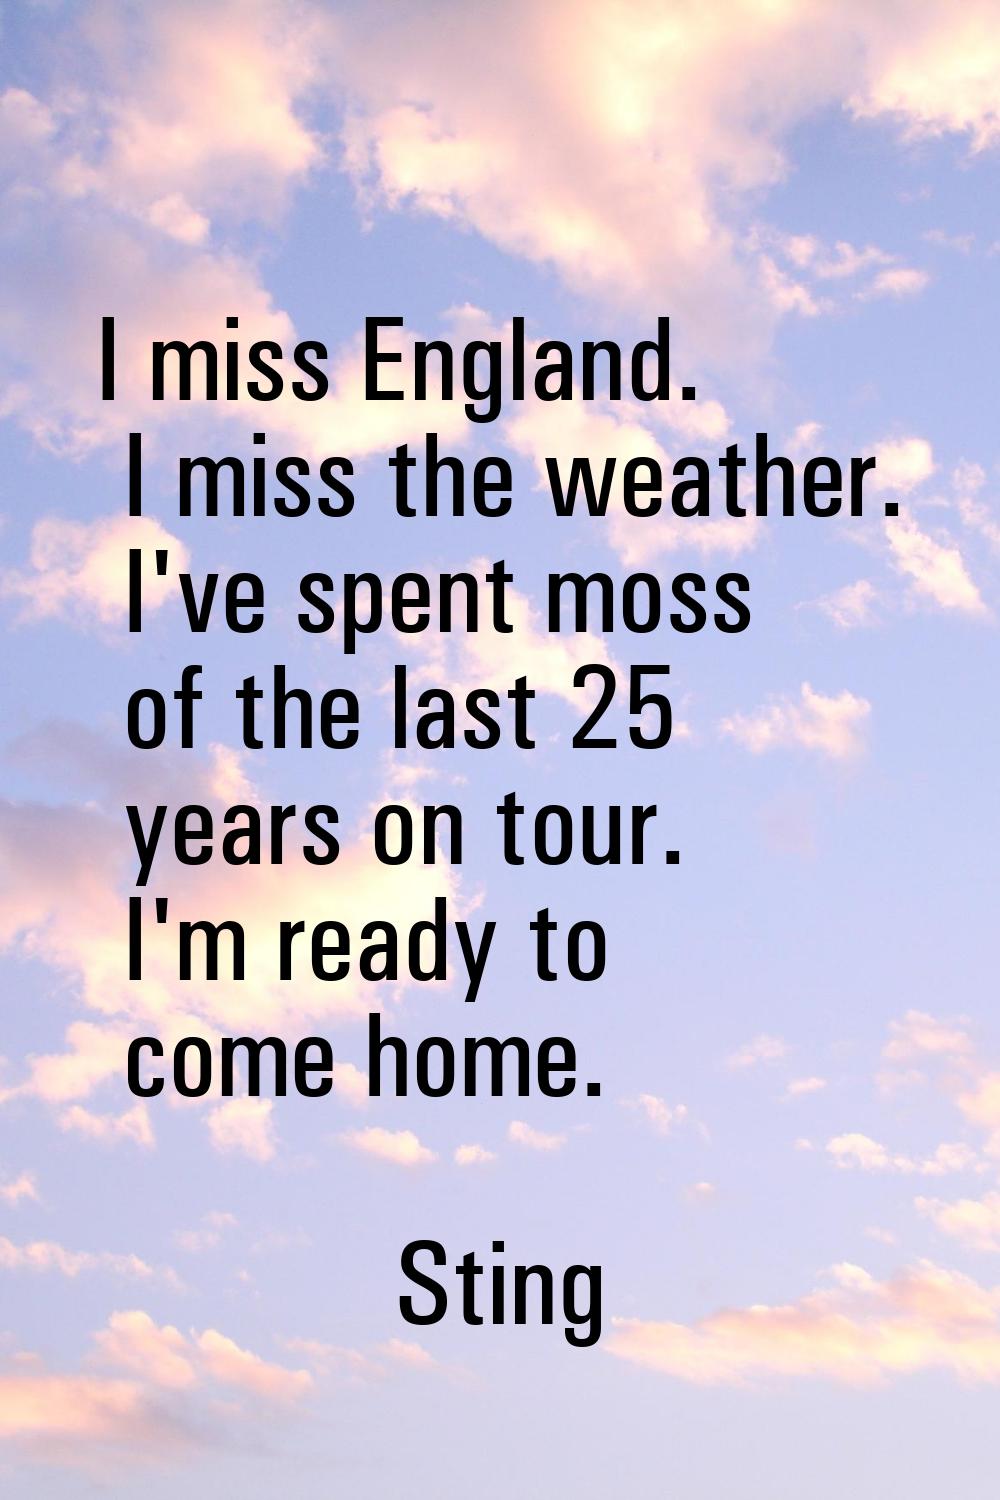 I miss England. I miss the weather. I've spent moss of the last 25 years on tour. I'm ready to come